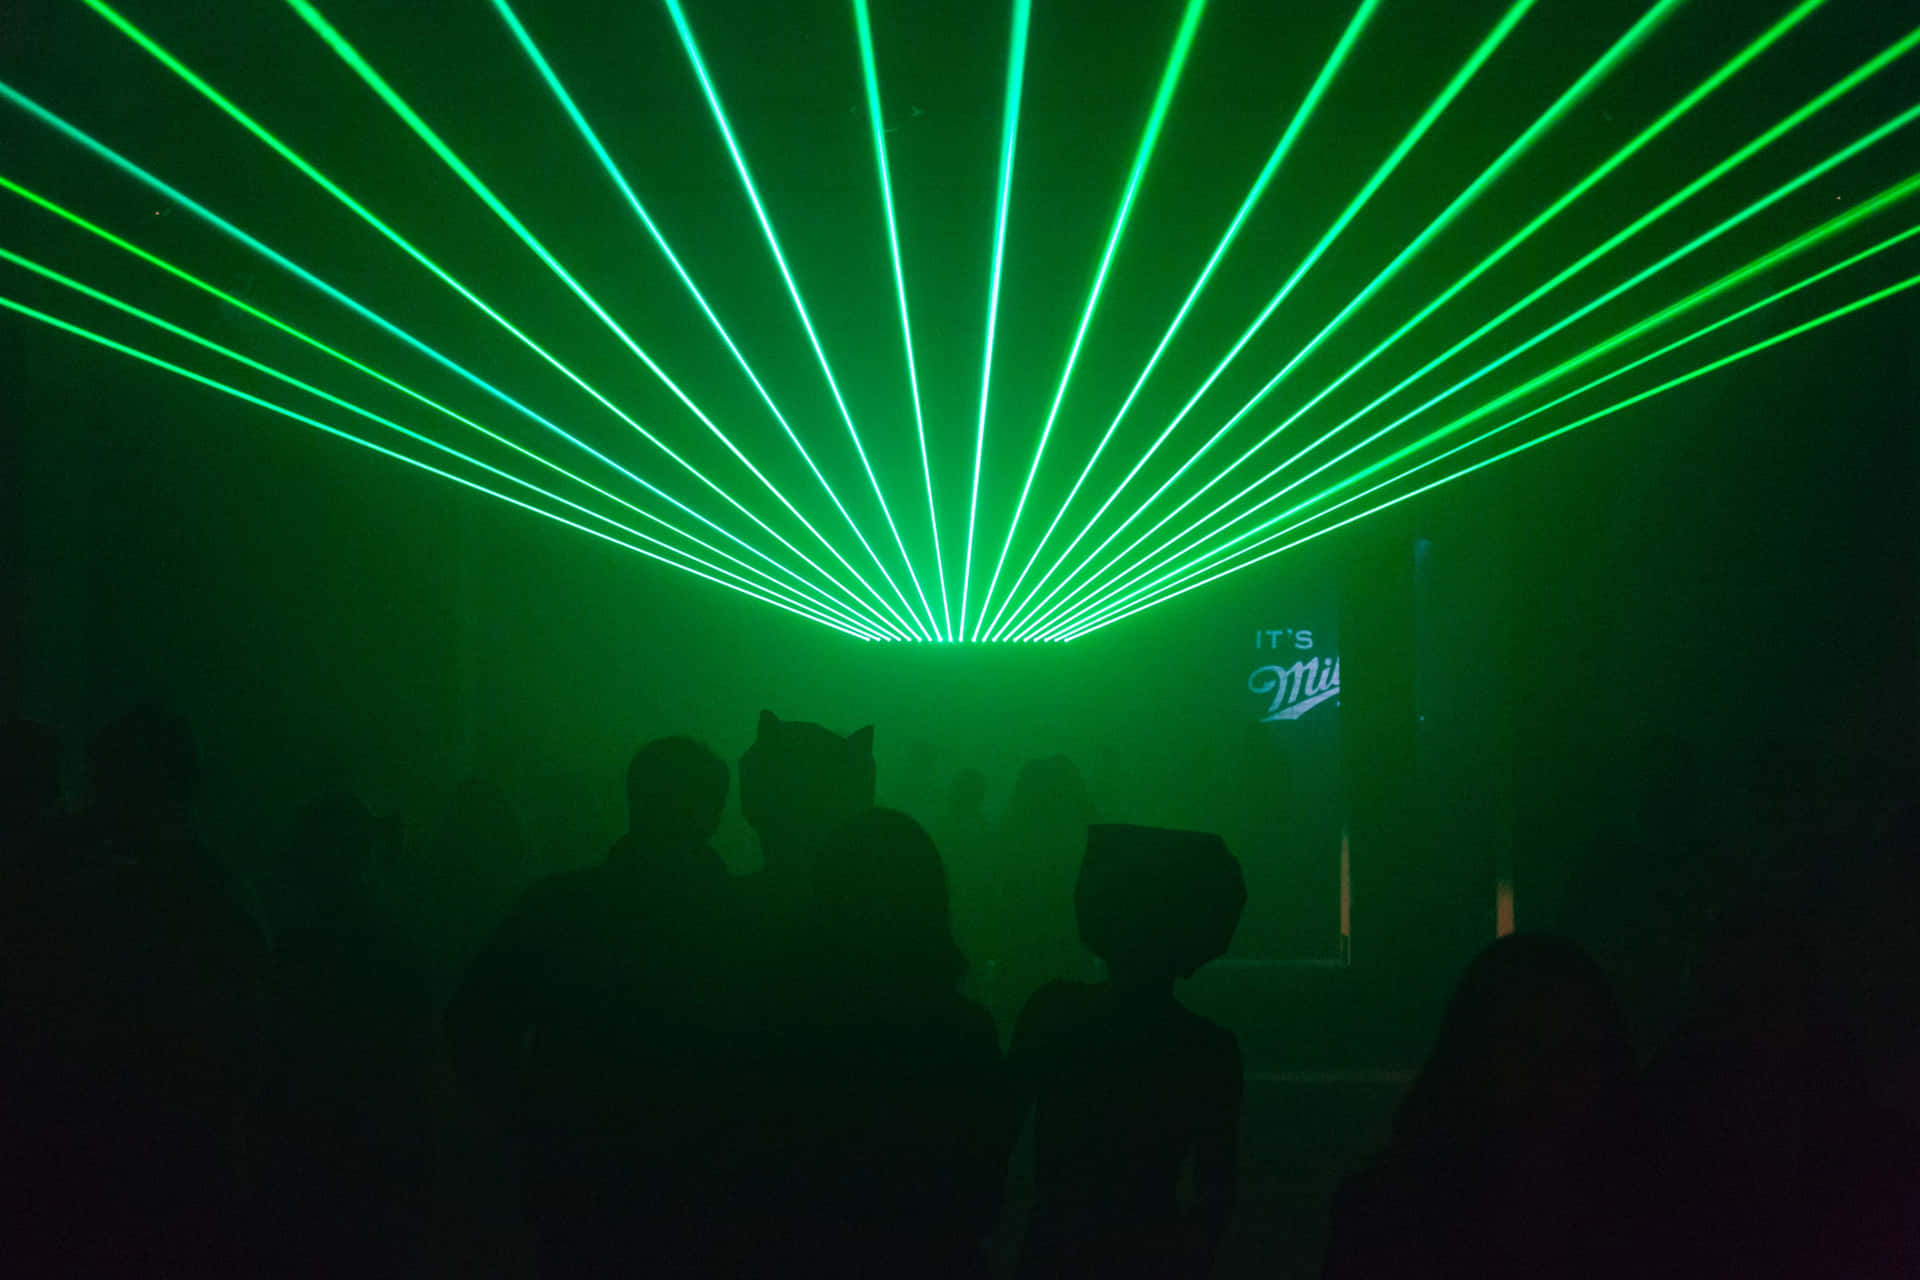 A Group Of People Standing In Front Of A Green Laser Light